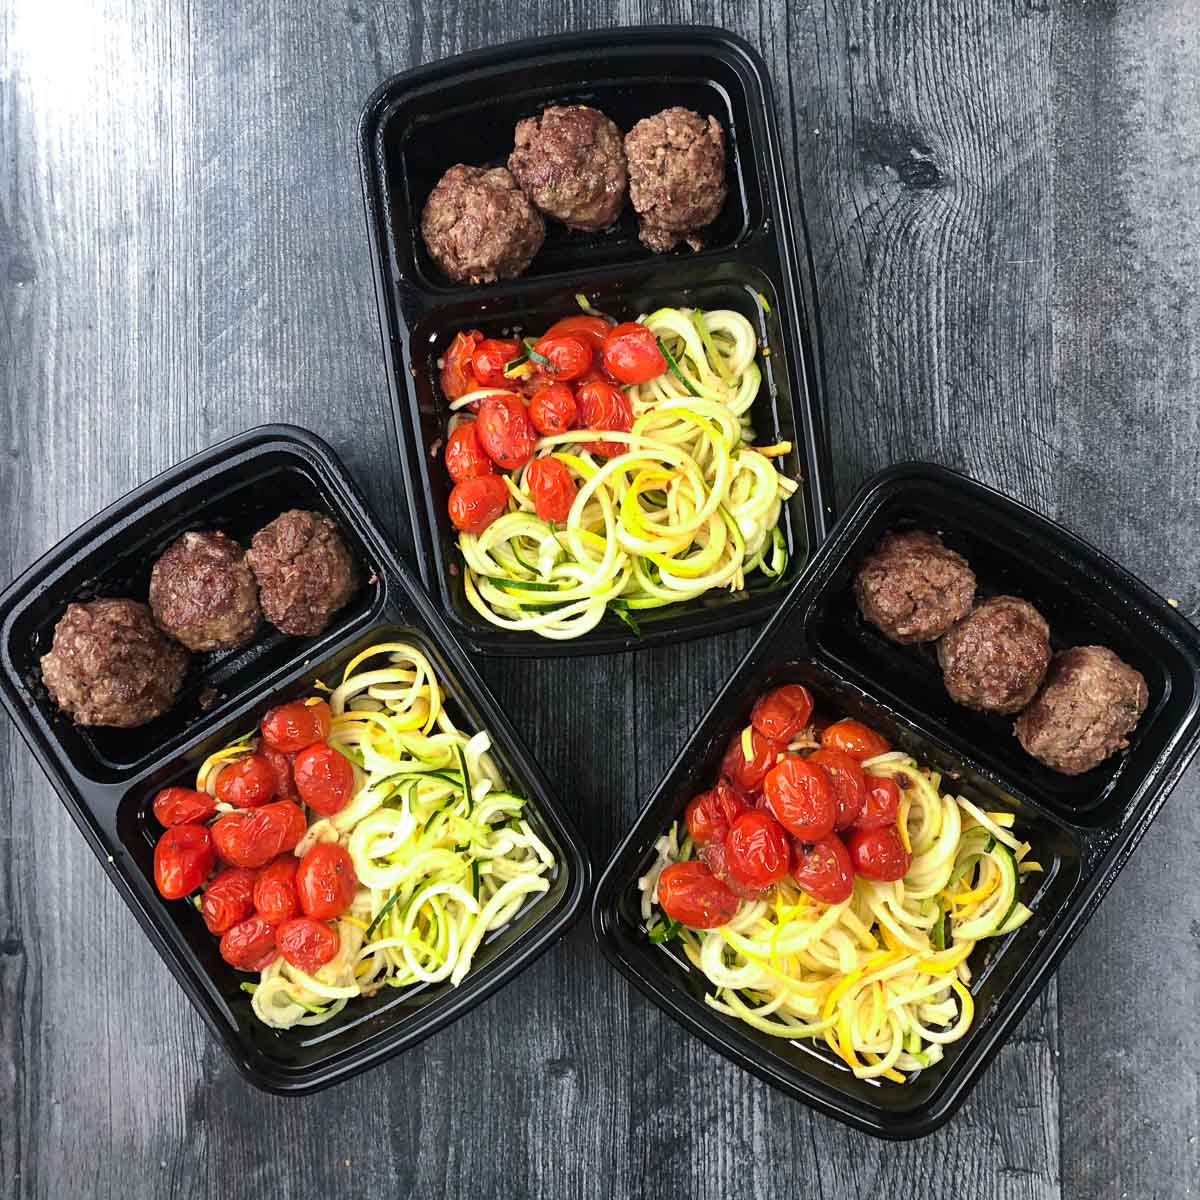 3 containers with homemade frozen microwave meals with meatballs and zucchini noodles